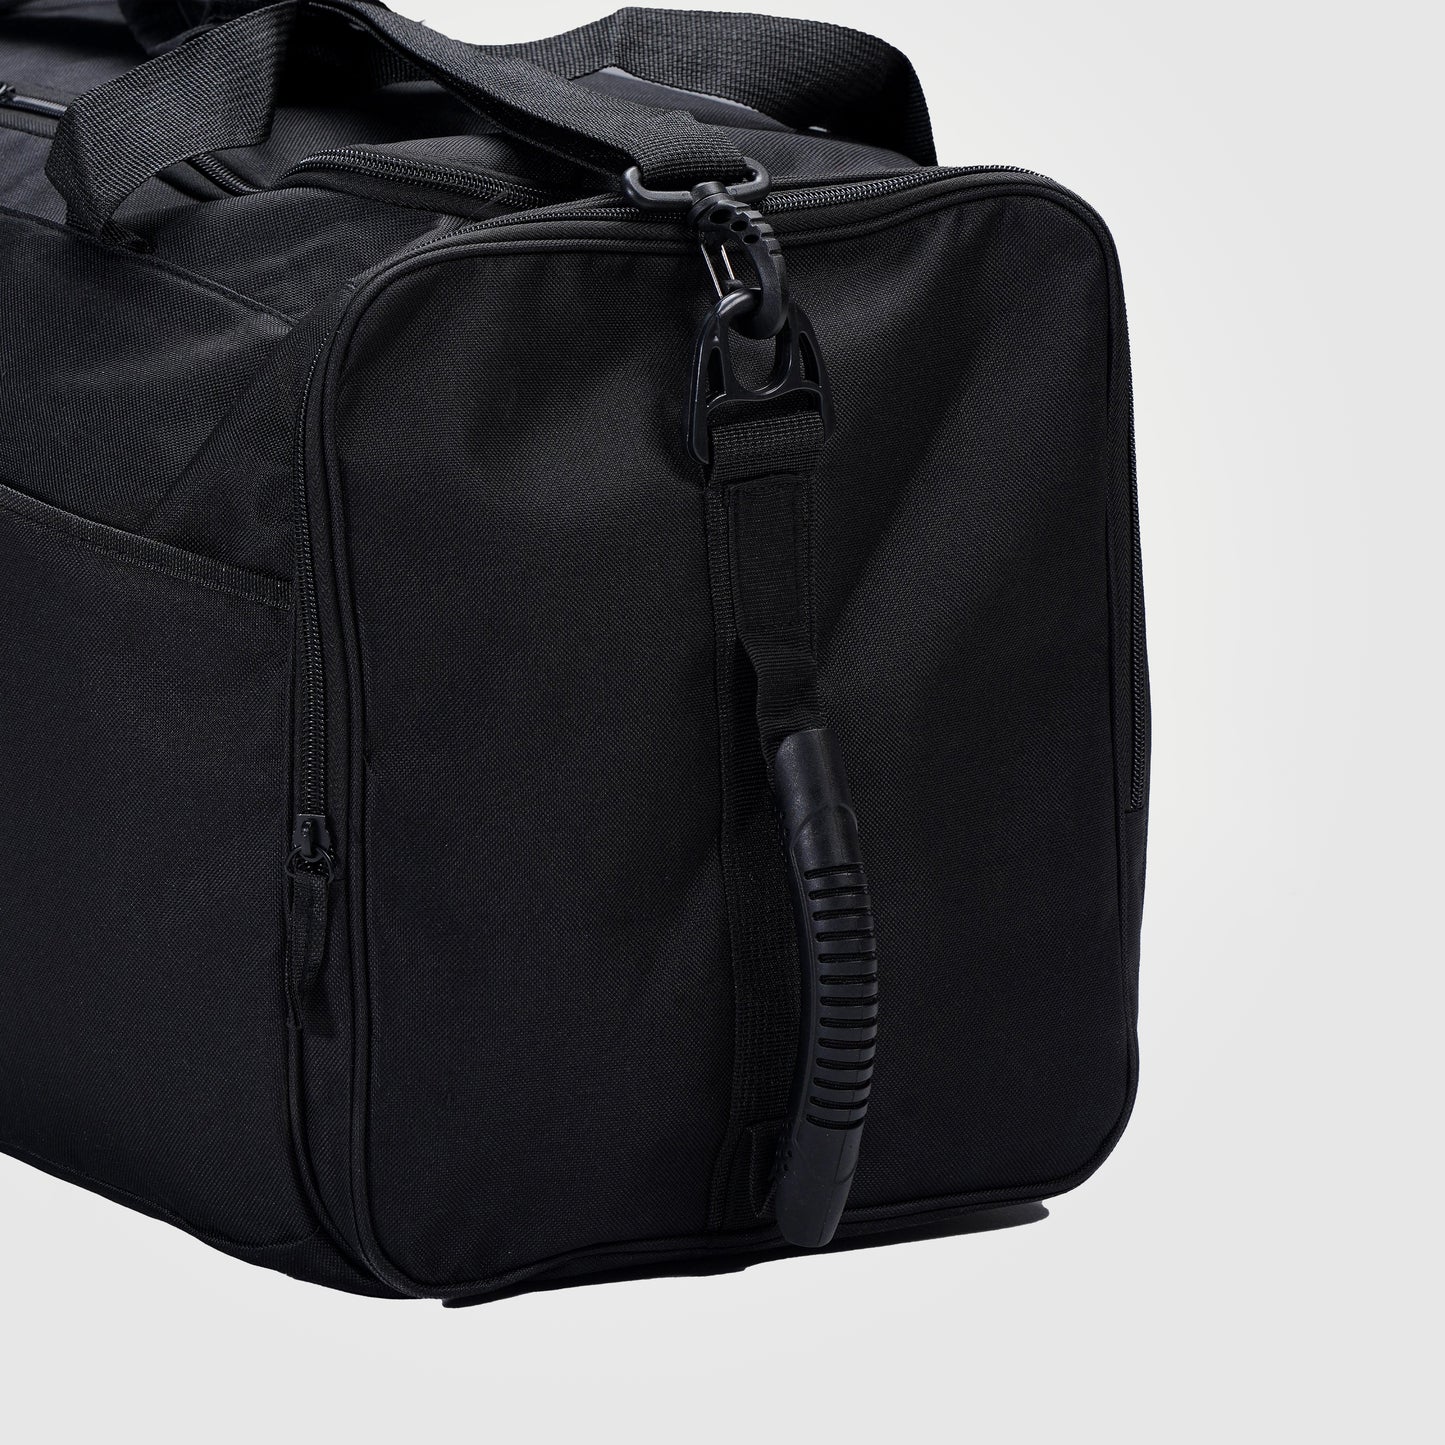 Max-Carry Gym Holdall (Black)